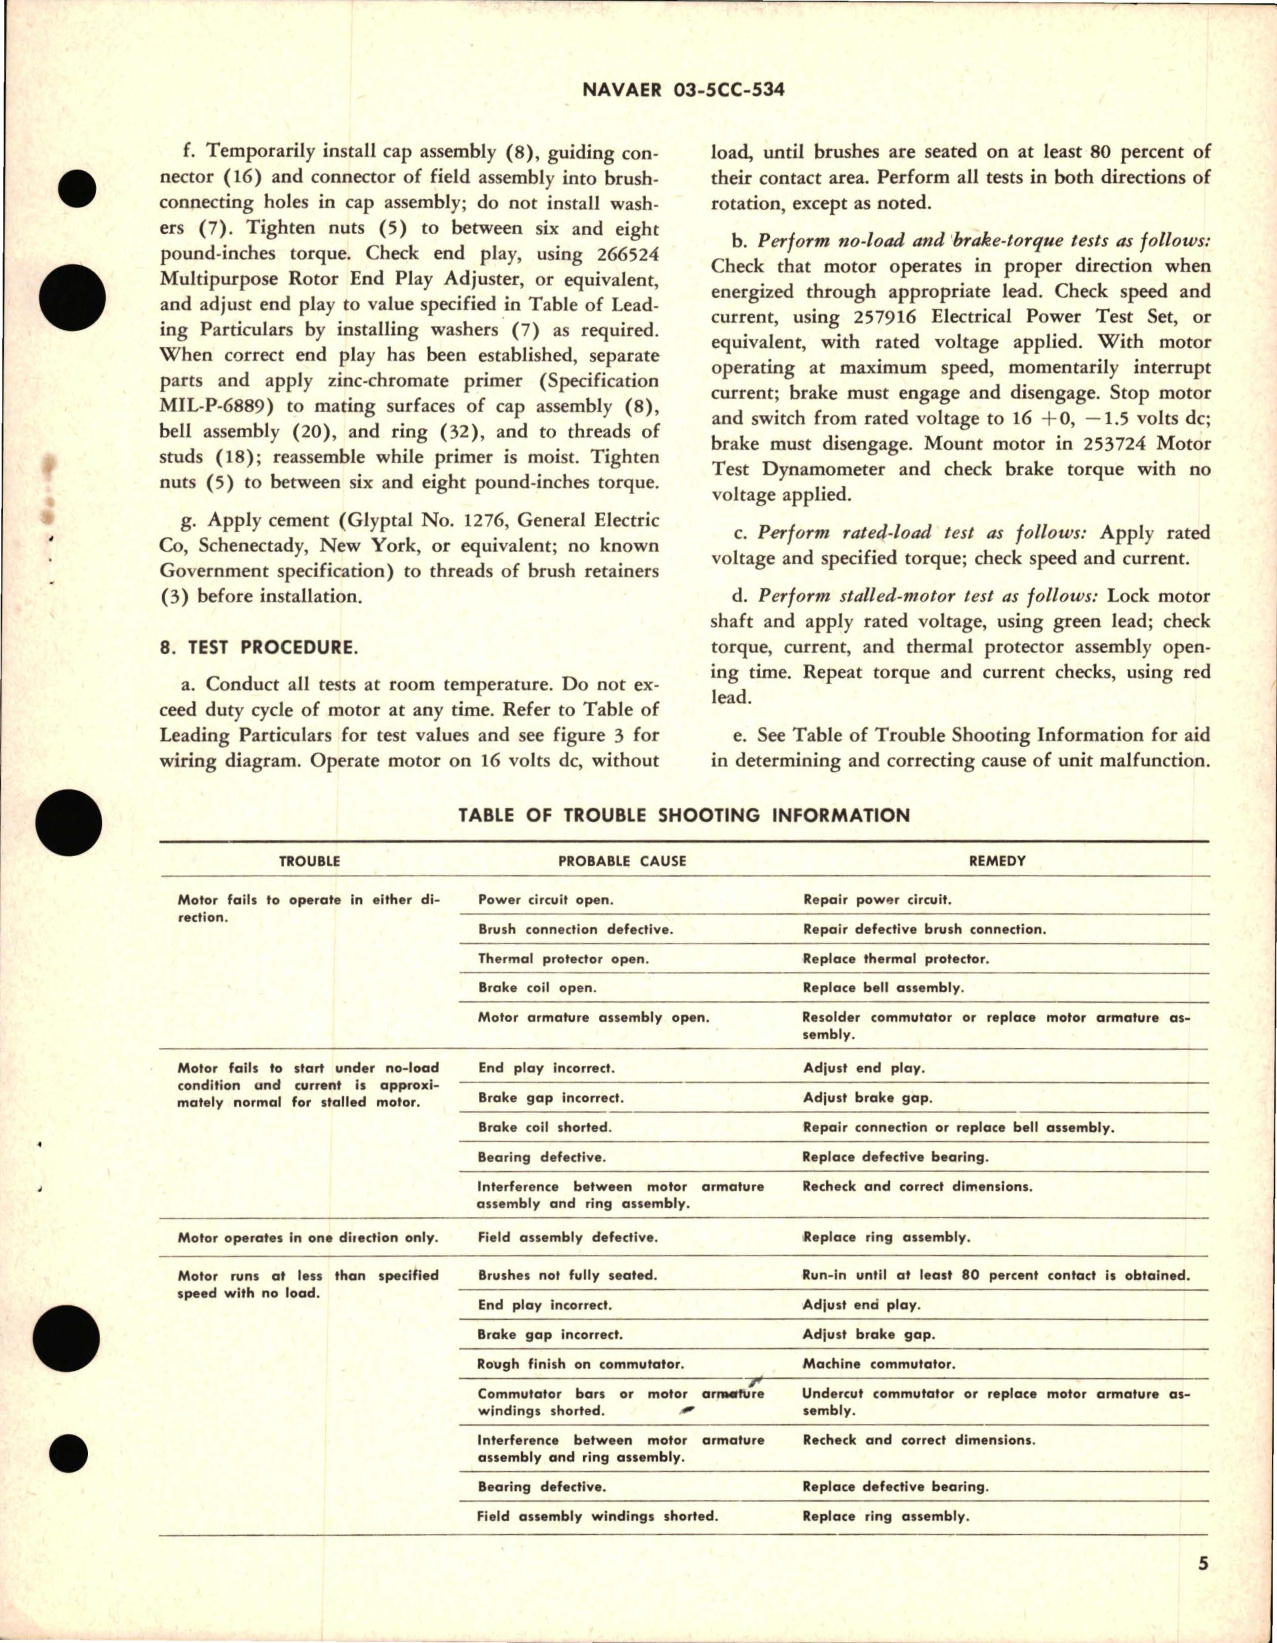 Sample page 5 from AirCorps Library document: Overhaul Instructions with Parts Breakdown for HP Aircraft Direct Current Motor 0.035 - Part 32718